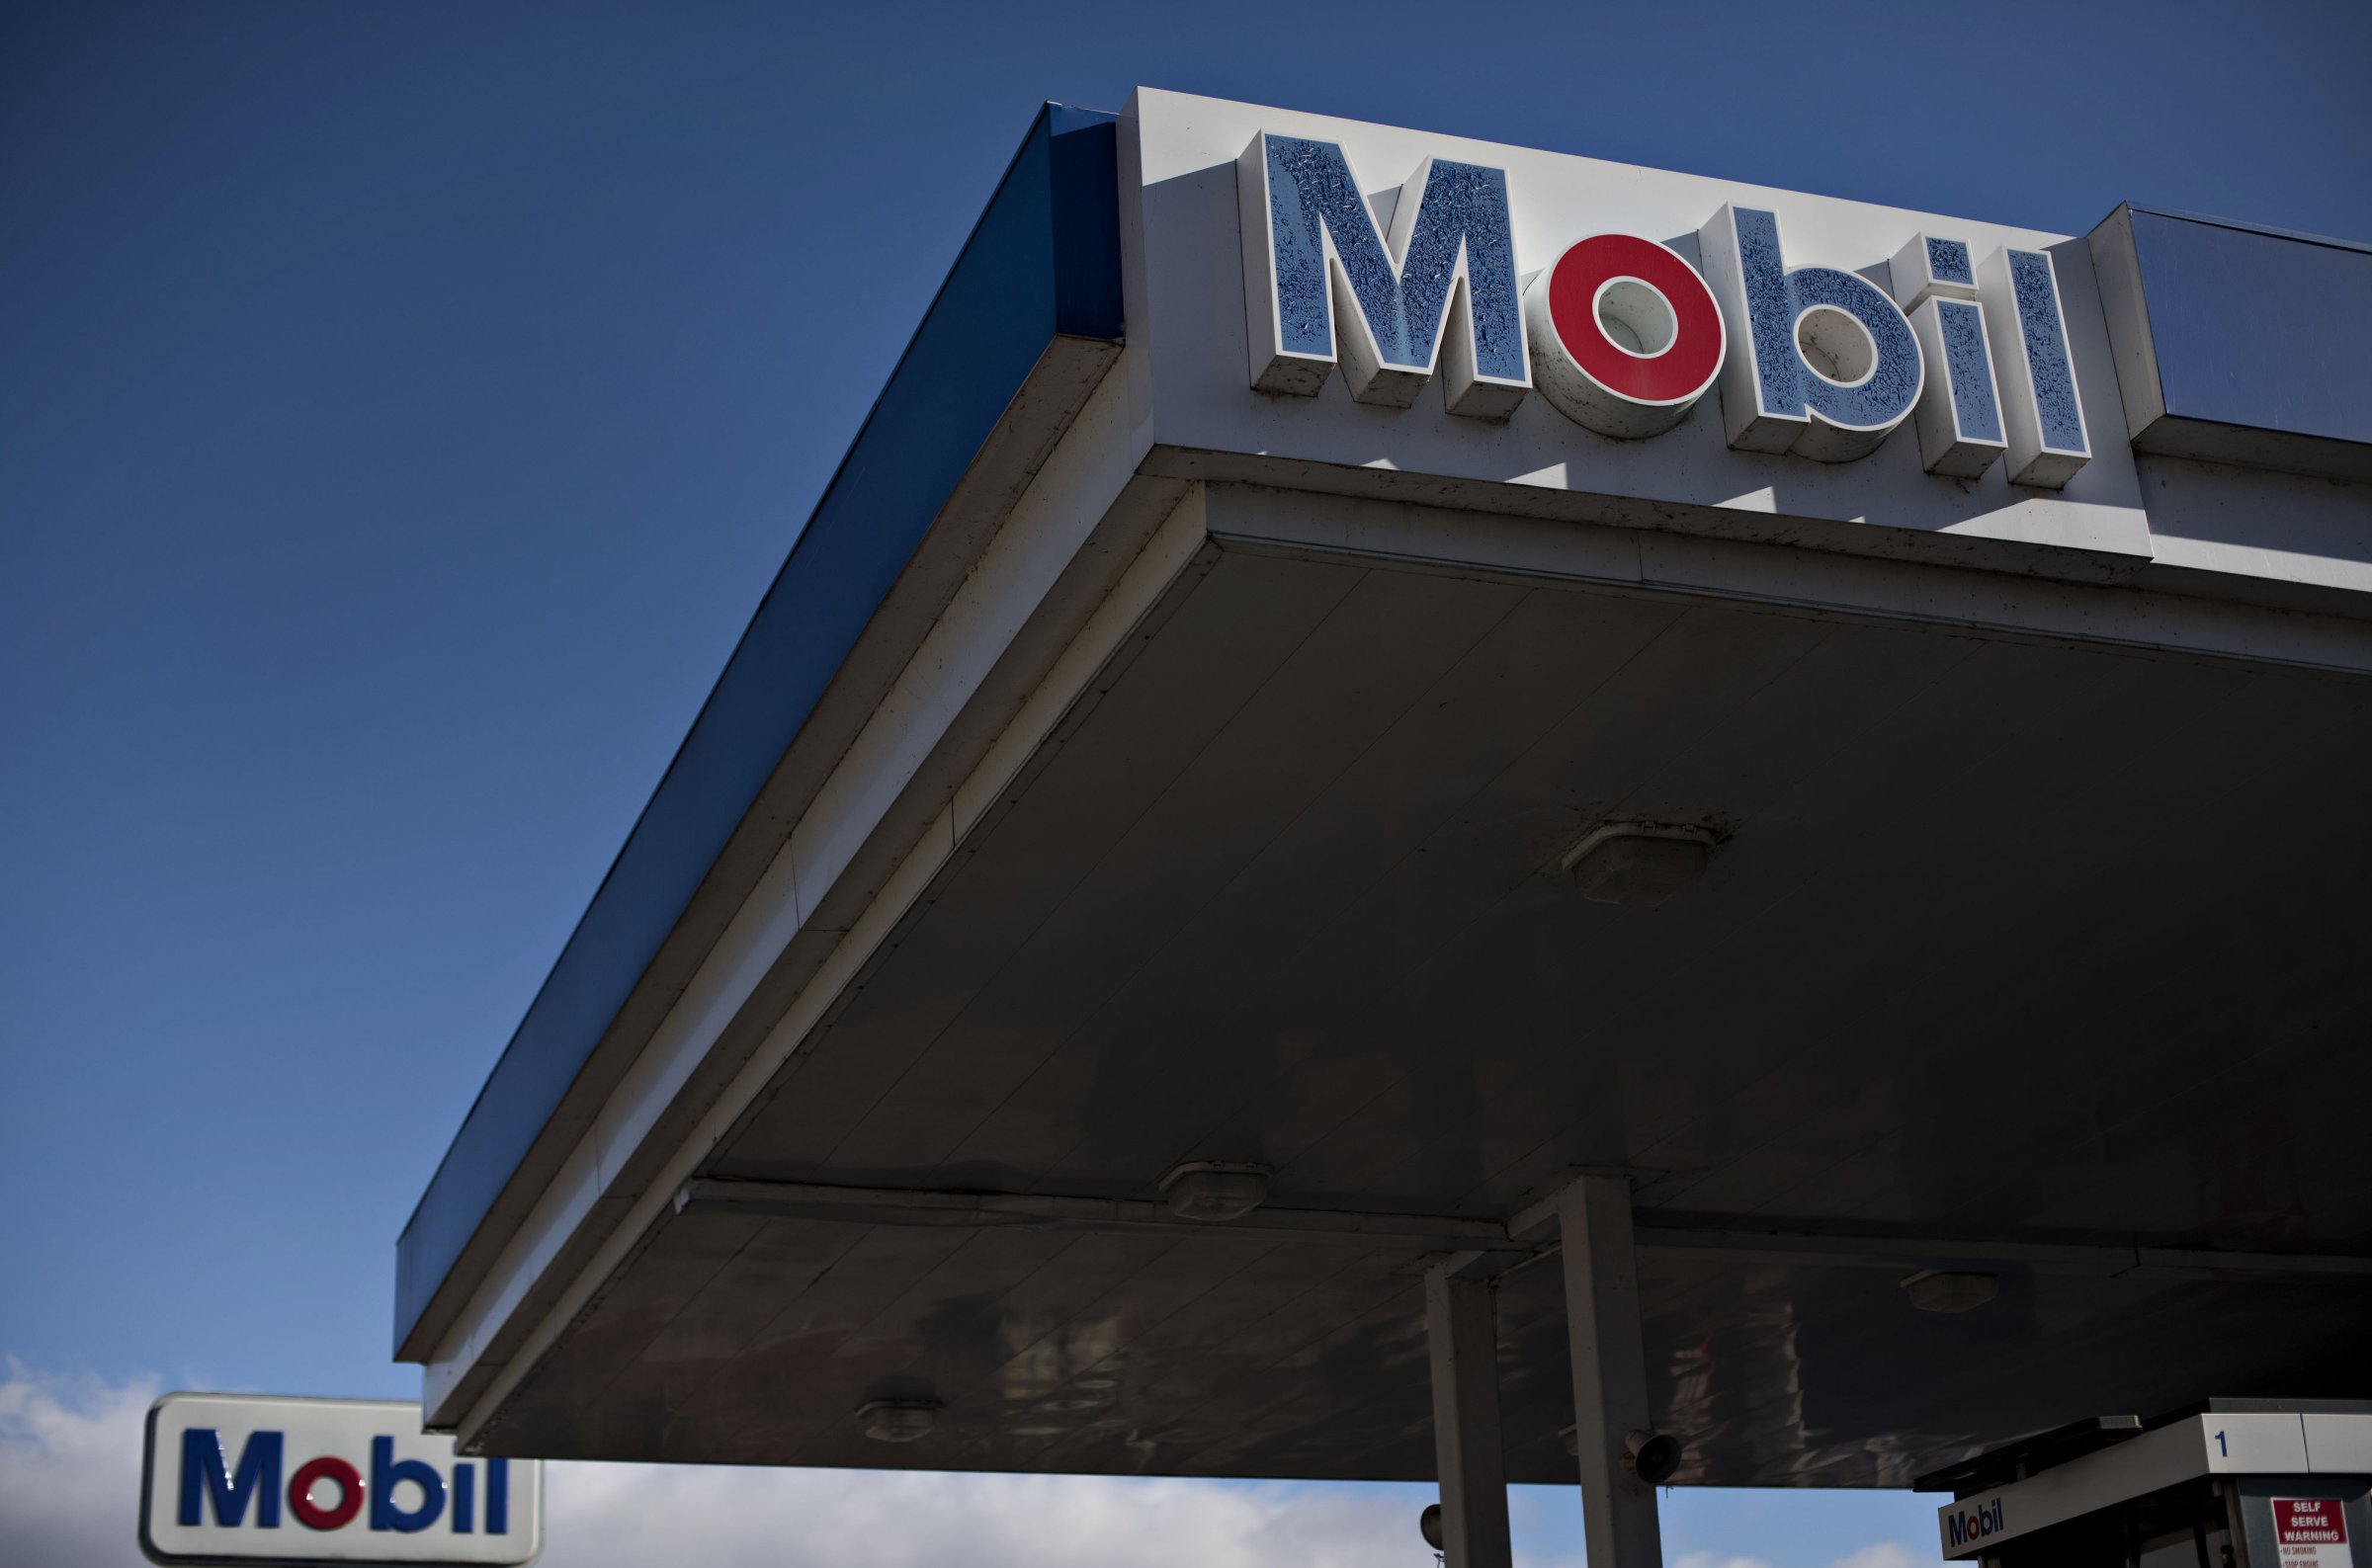 Exxon Mobil Corp. Gas Stations Ahead Of Earnings Figures